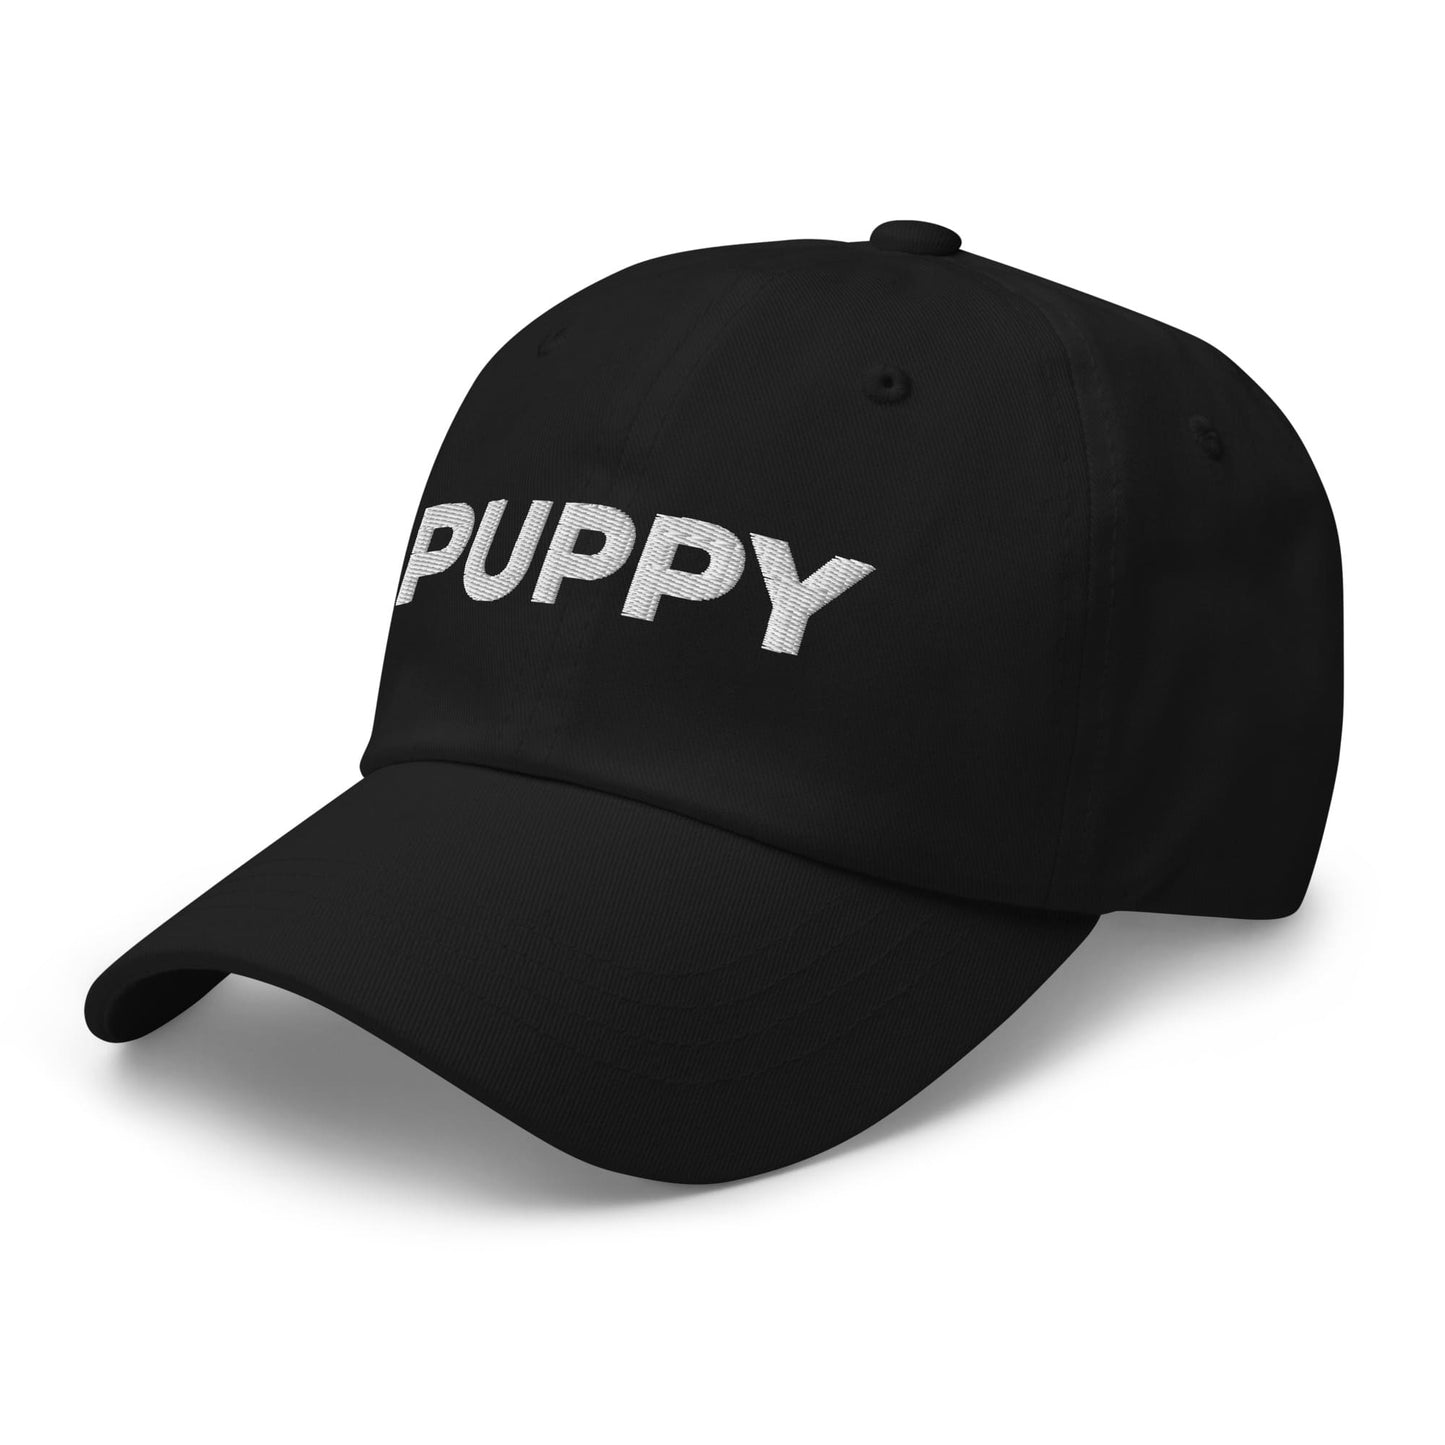 puppy pride and handler hats, matching embroidered pup play pride caps, right